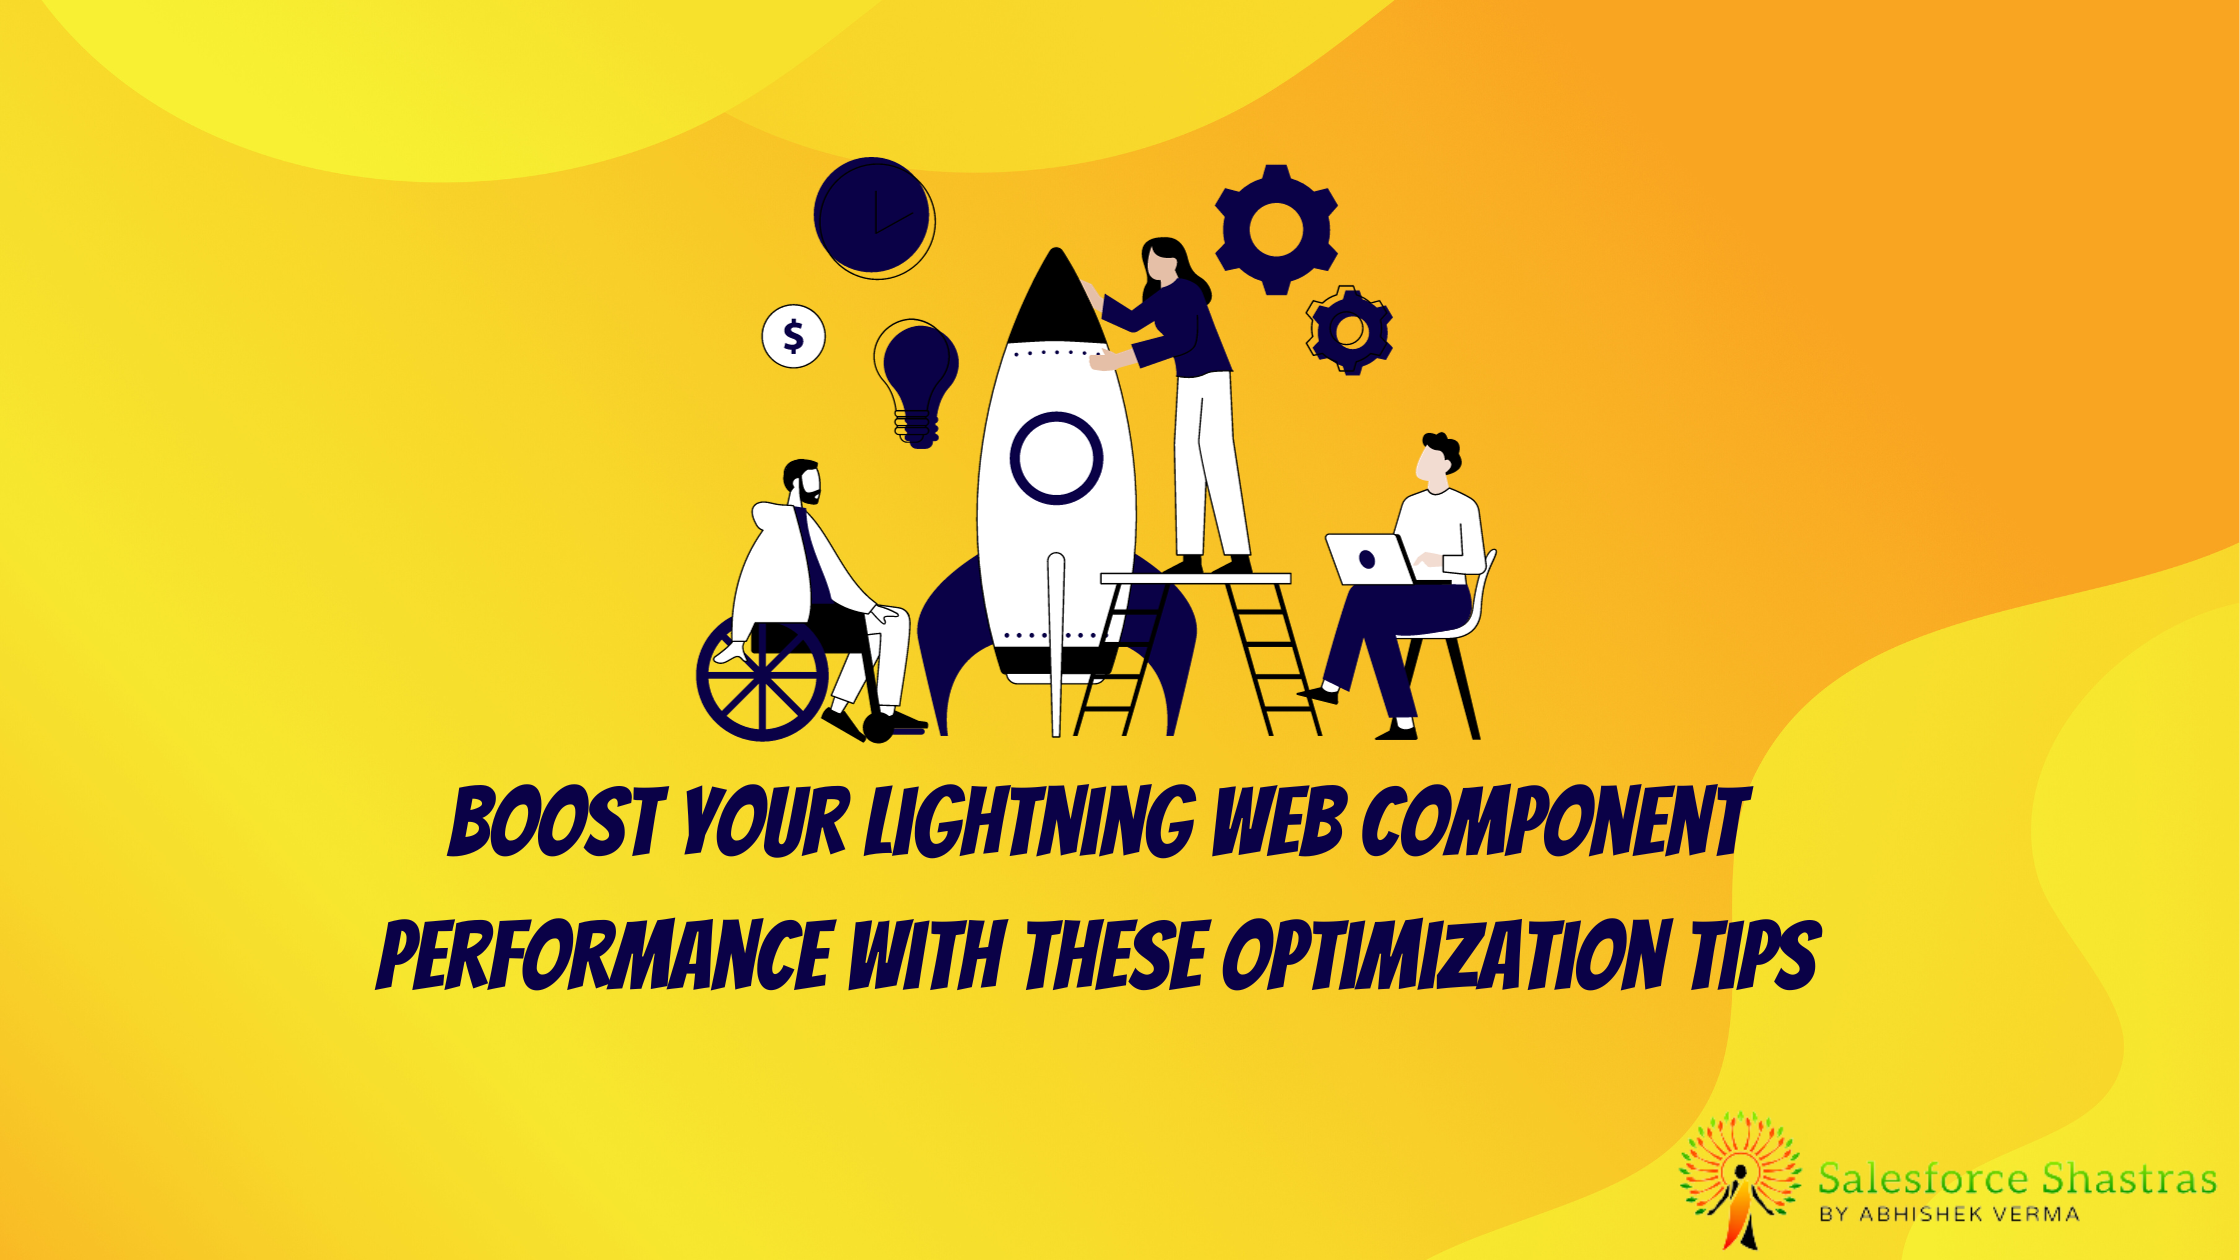 Boost Your Lightning Web Component Performance with These Optimization Tips Salesforce Shastras